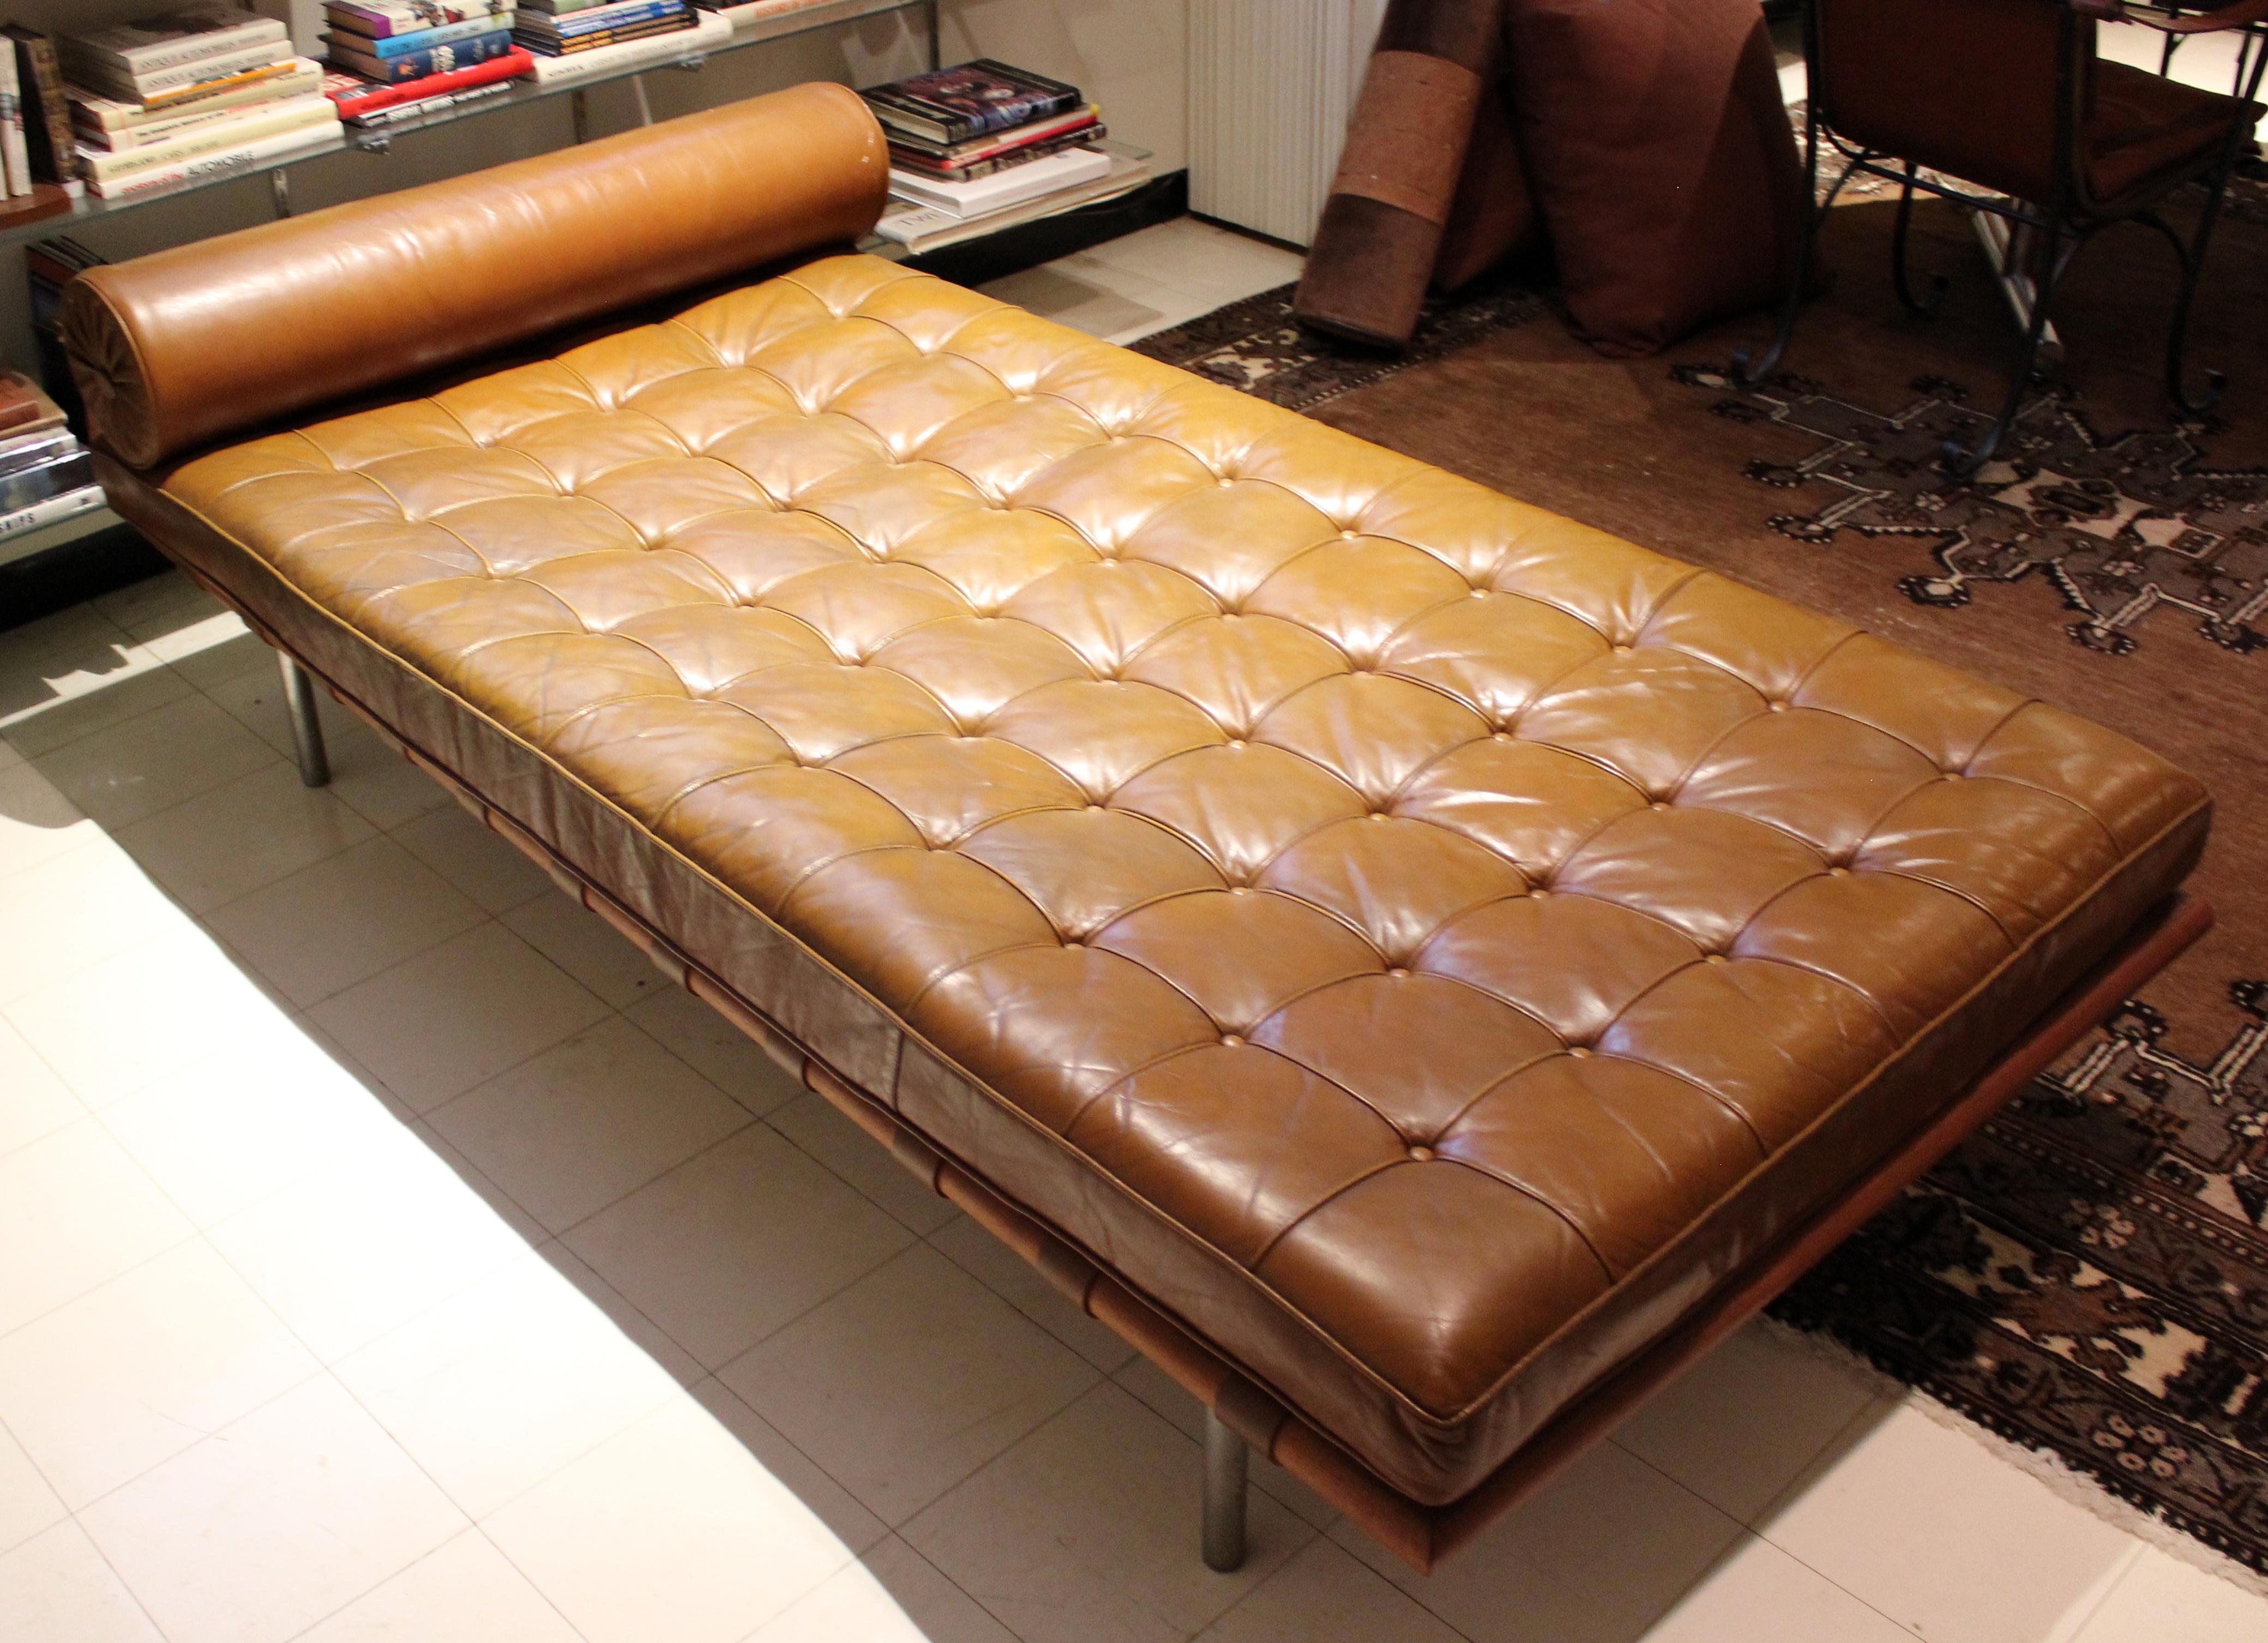 For your consideration is an amazing vintage original day bed or chaise, with an olive/brown leather upholstery, by Mies van der Rohe, circa the 1960s. In excellent vintage condition. The dimensions are 78